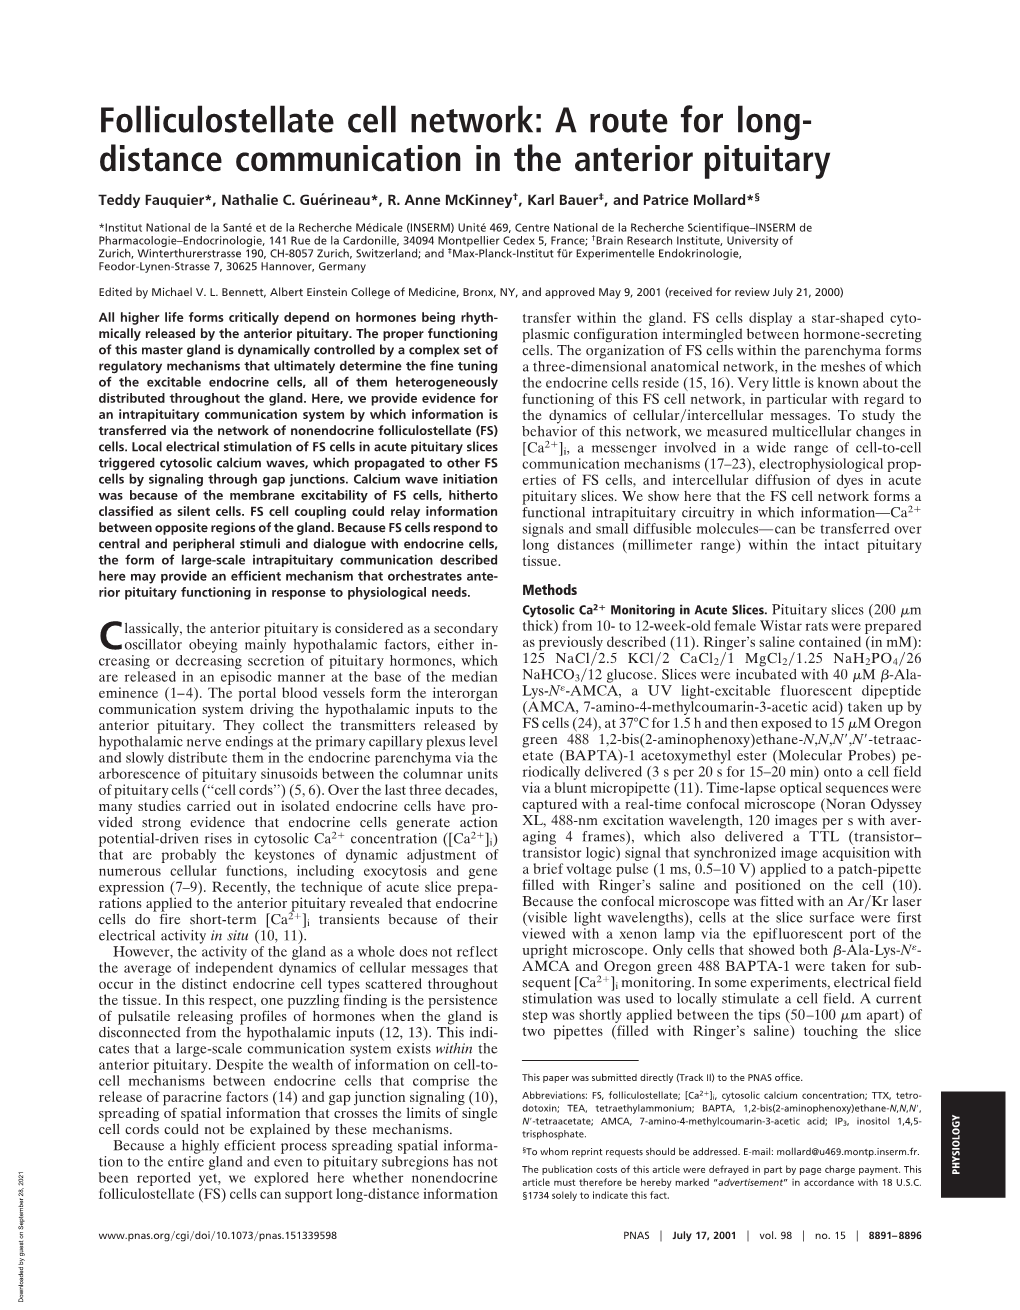 Folliculostellate Cell Network: a Route for Long- Distance Communication in the Anterior Pituitary